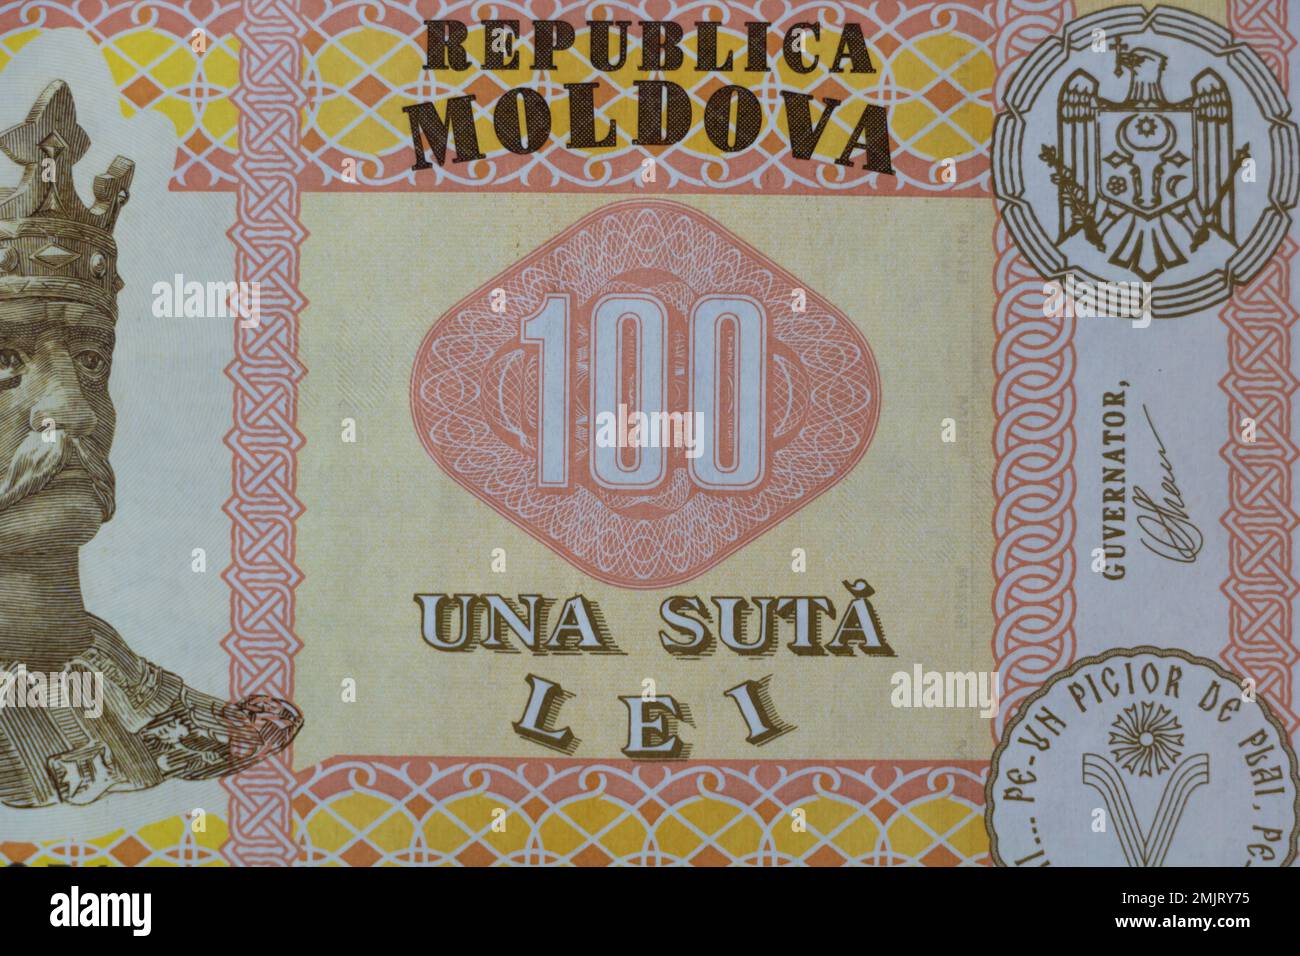 A Magnified Look at a 100 Moldovan Lei Banknote close up Stock Photo